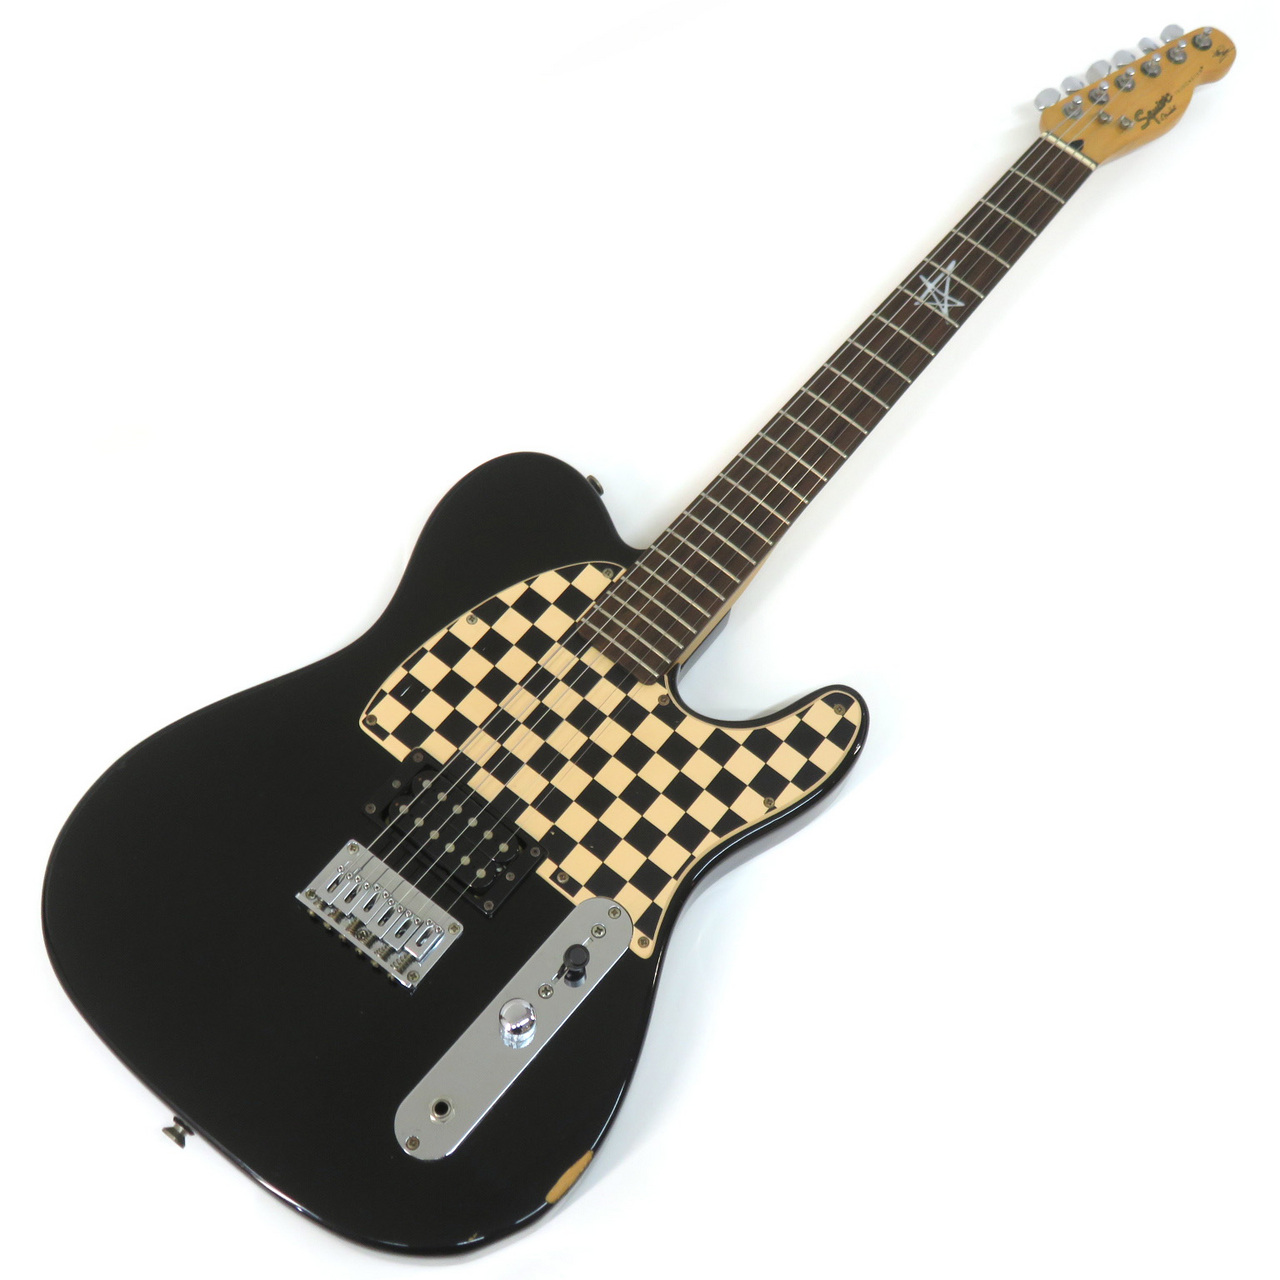 Squier by Fender Avril Lavigne Telecaster（中古/送料無料）【楽器 